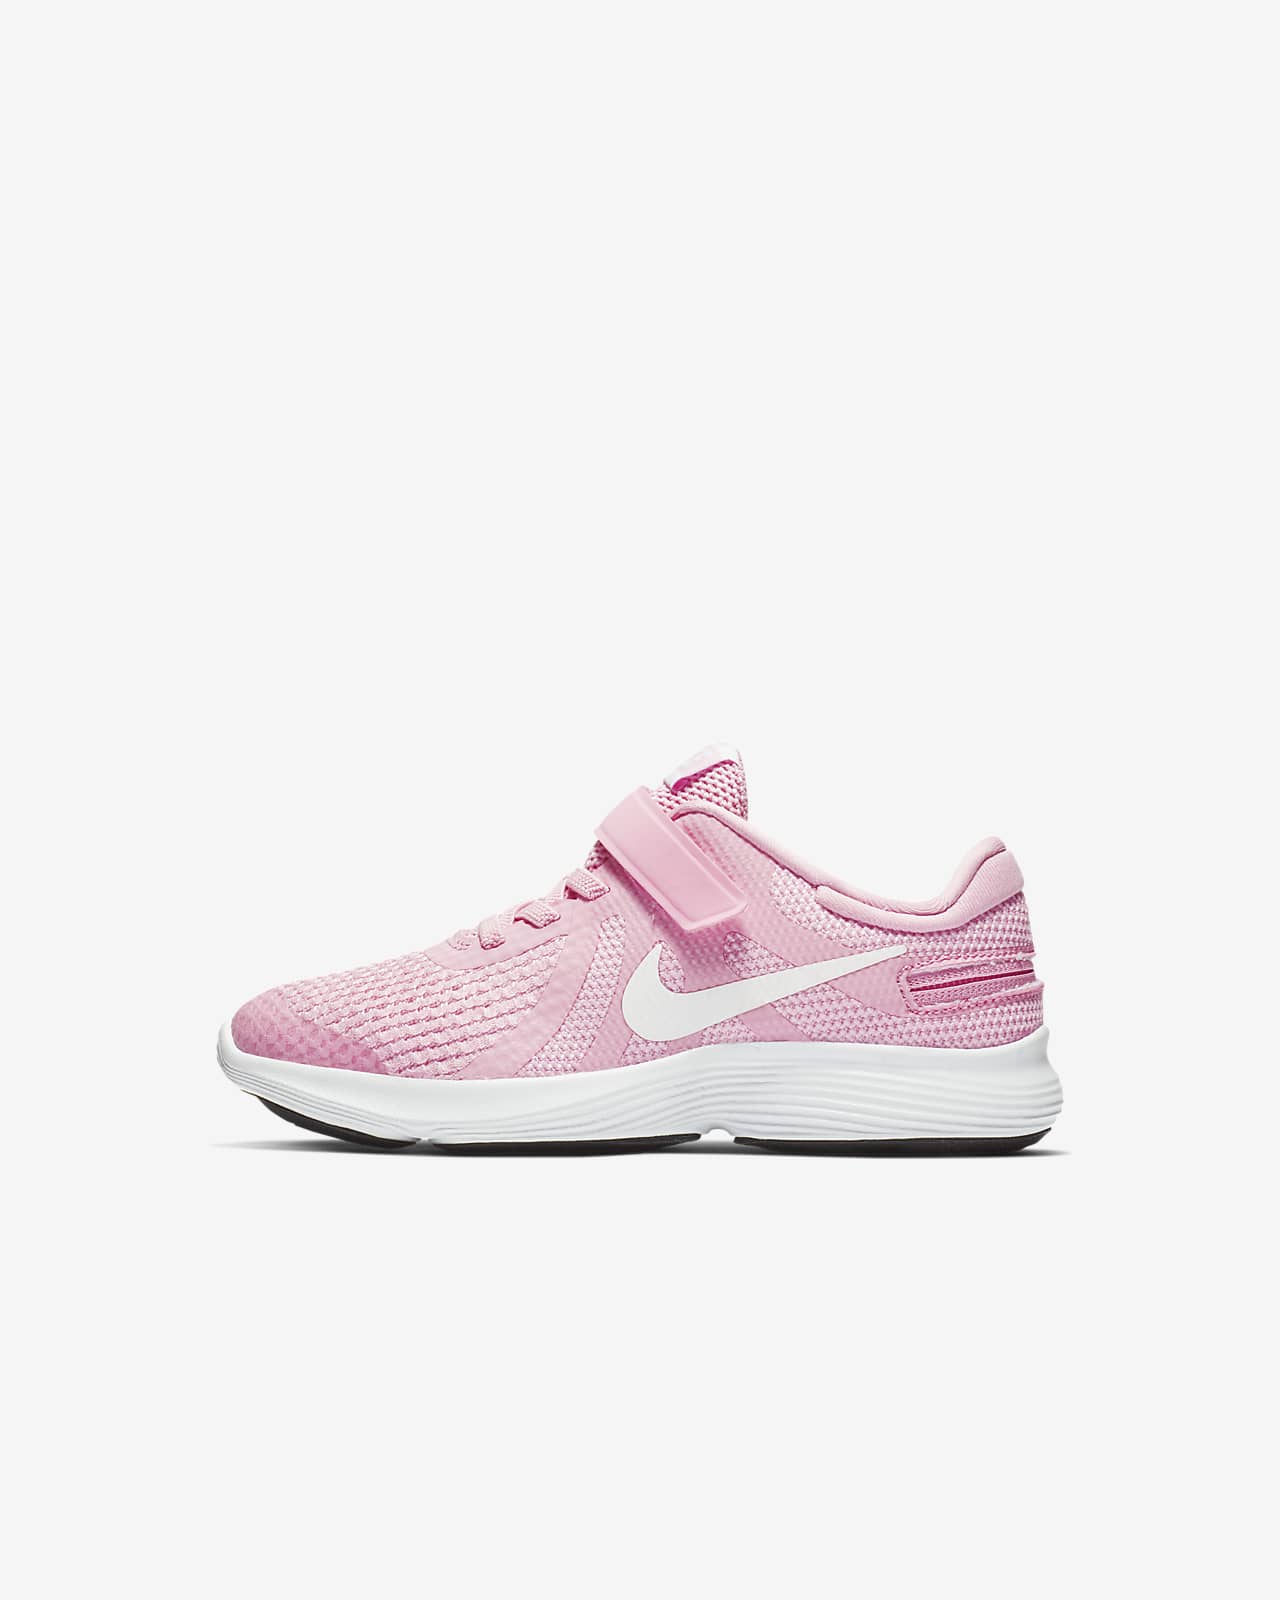 Nike Revolution 4 FlyEase Younger Kids' Shoe